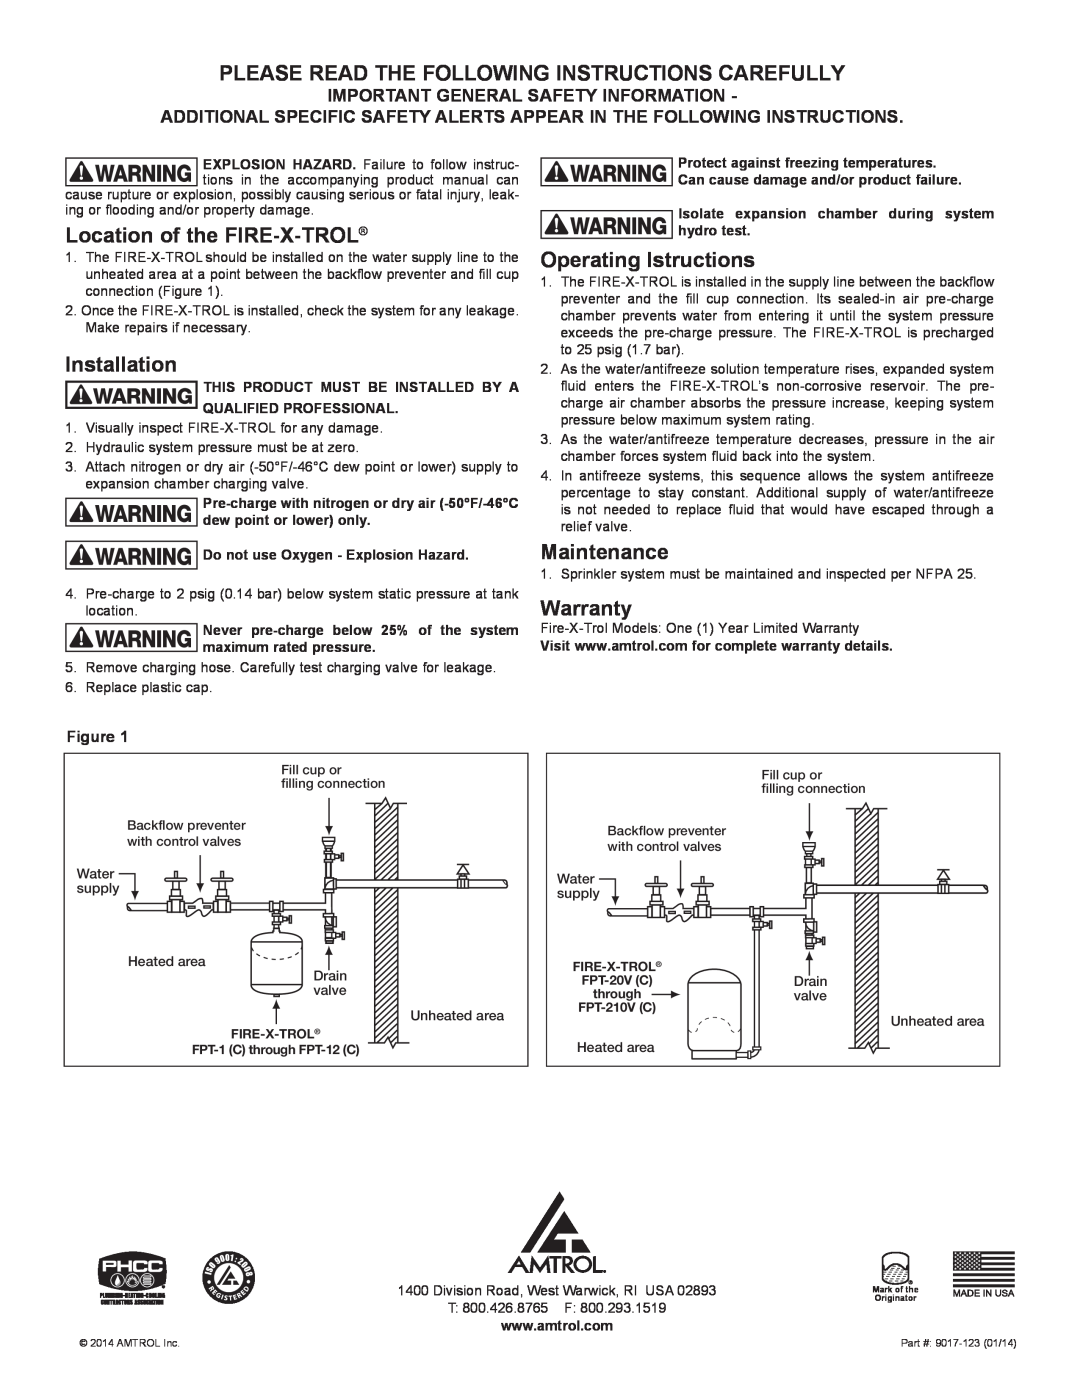 Amtrol fpt-1 Please Read The Following Instructions Carefully, Location of the FIRE-X-TROL, Installation, Maintenance 